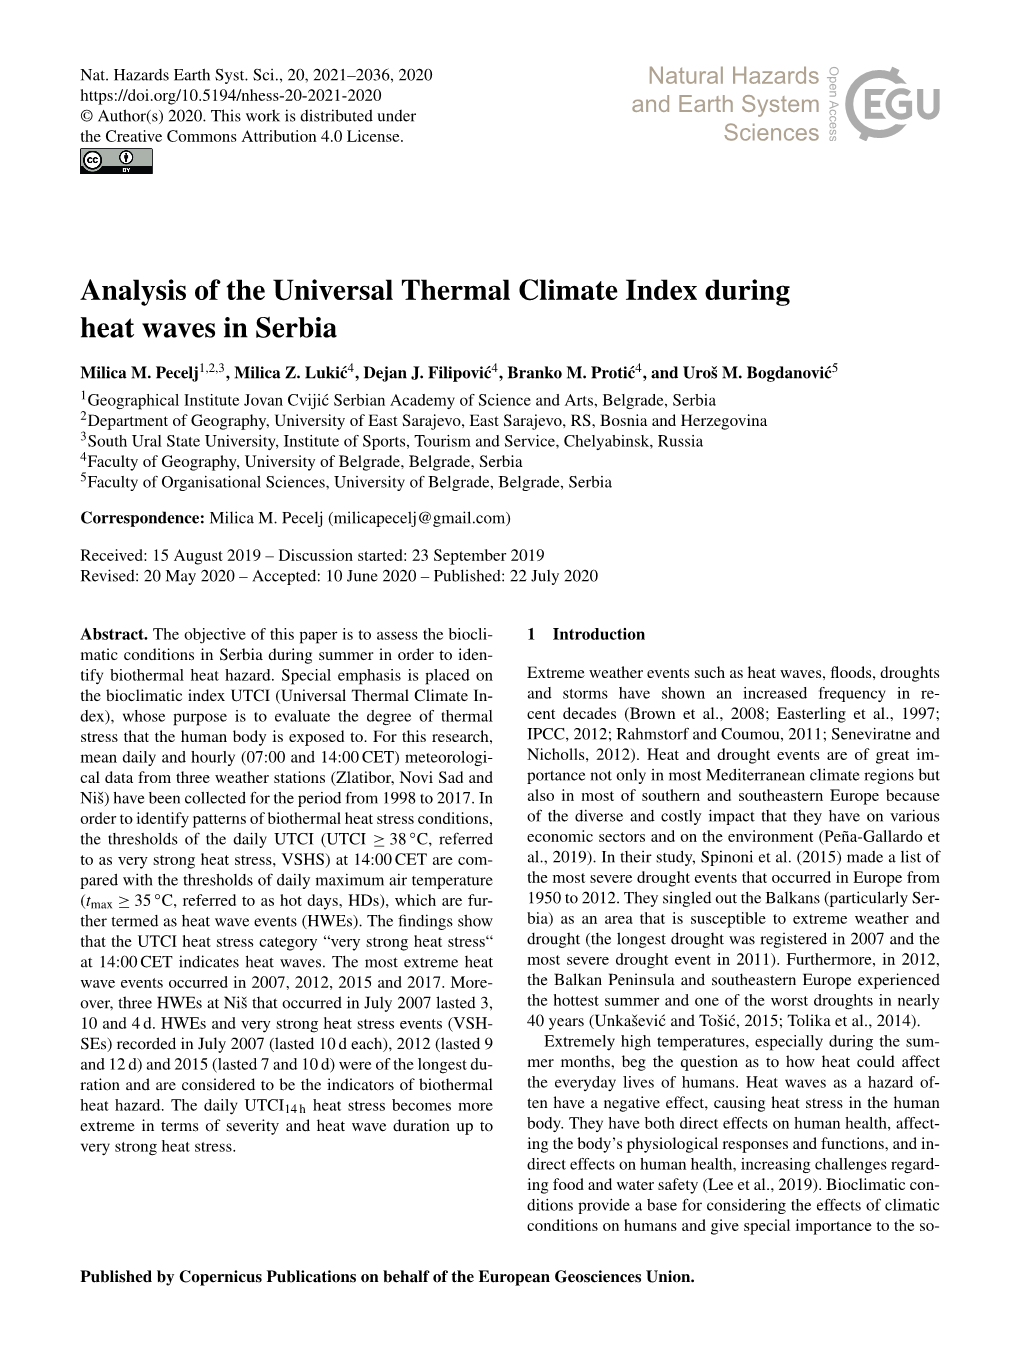 Analysis of the Universal Thermal Climate Index During Heat Waves in Serbia